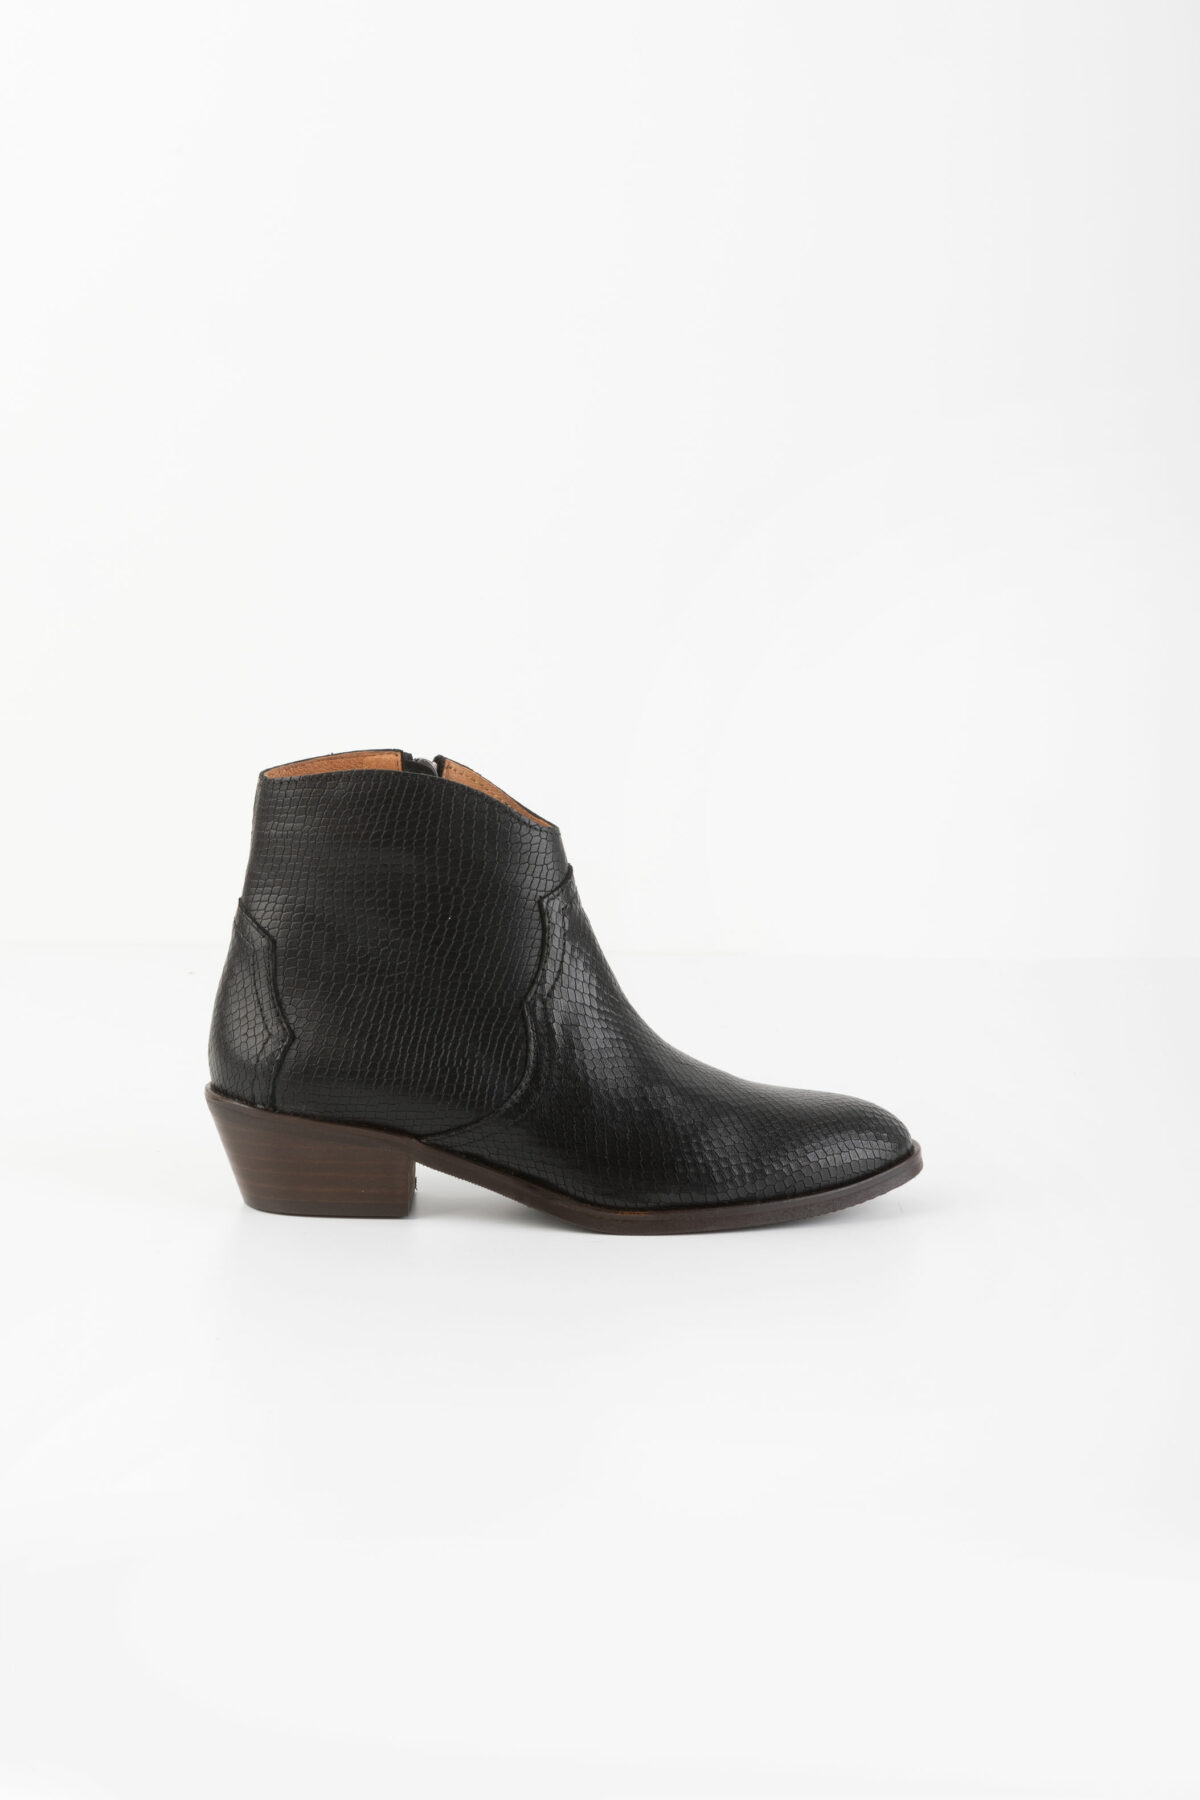 fiona-boots-black-snake-booties-anonymus-matchboxathens